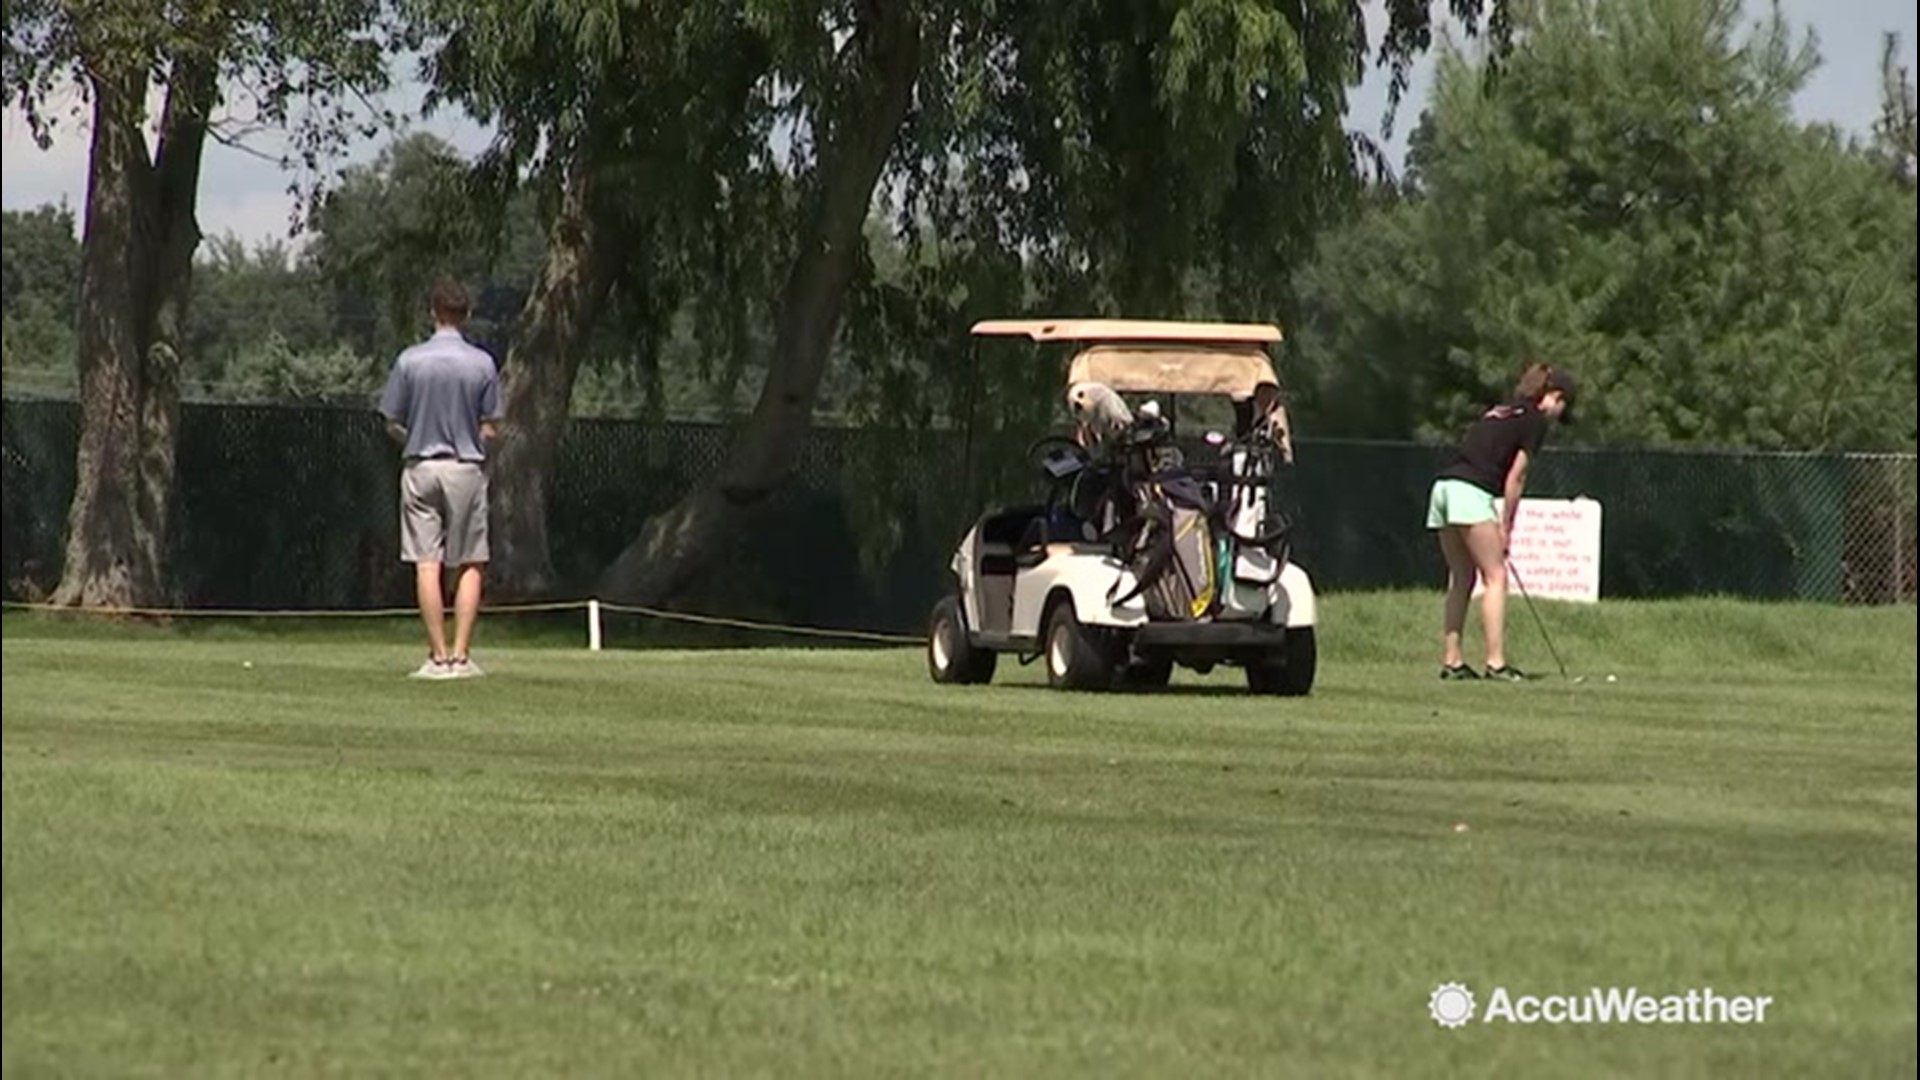 Sunny skies and moderate temperatures lured many residents of Schoolcraft, Michigan, to the golf courses on Aug. 22., so they could take a swing at the 18 holes.